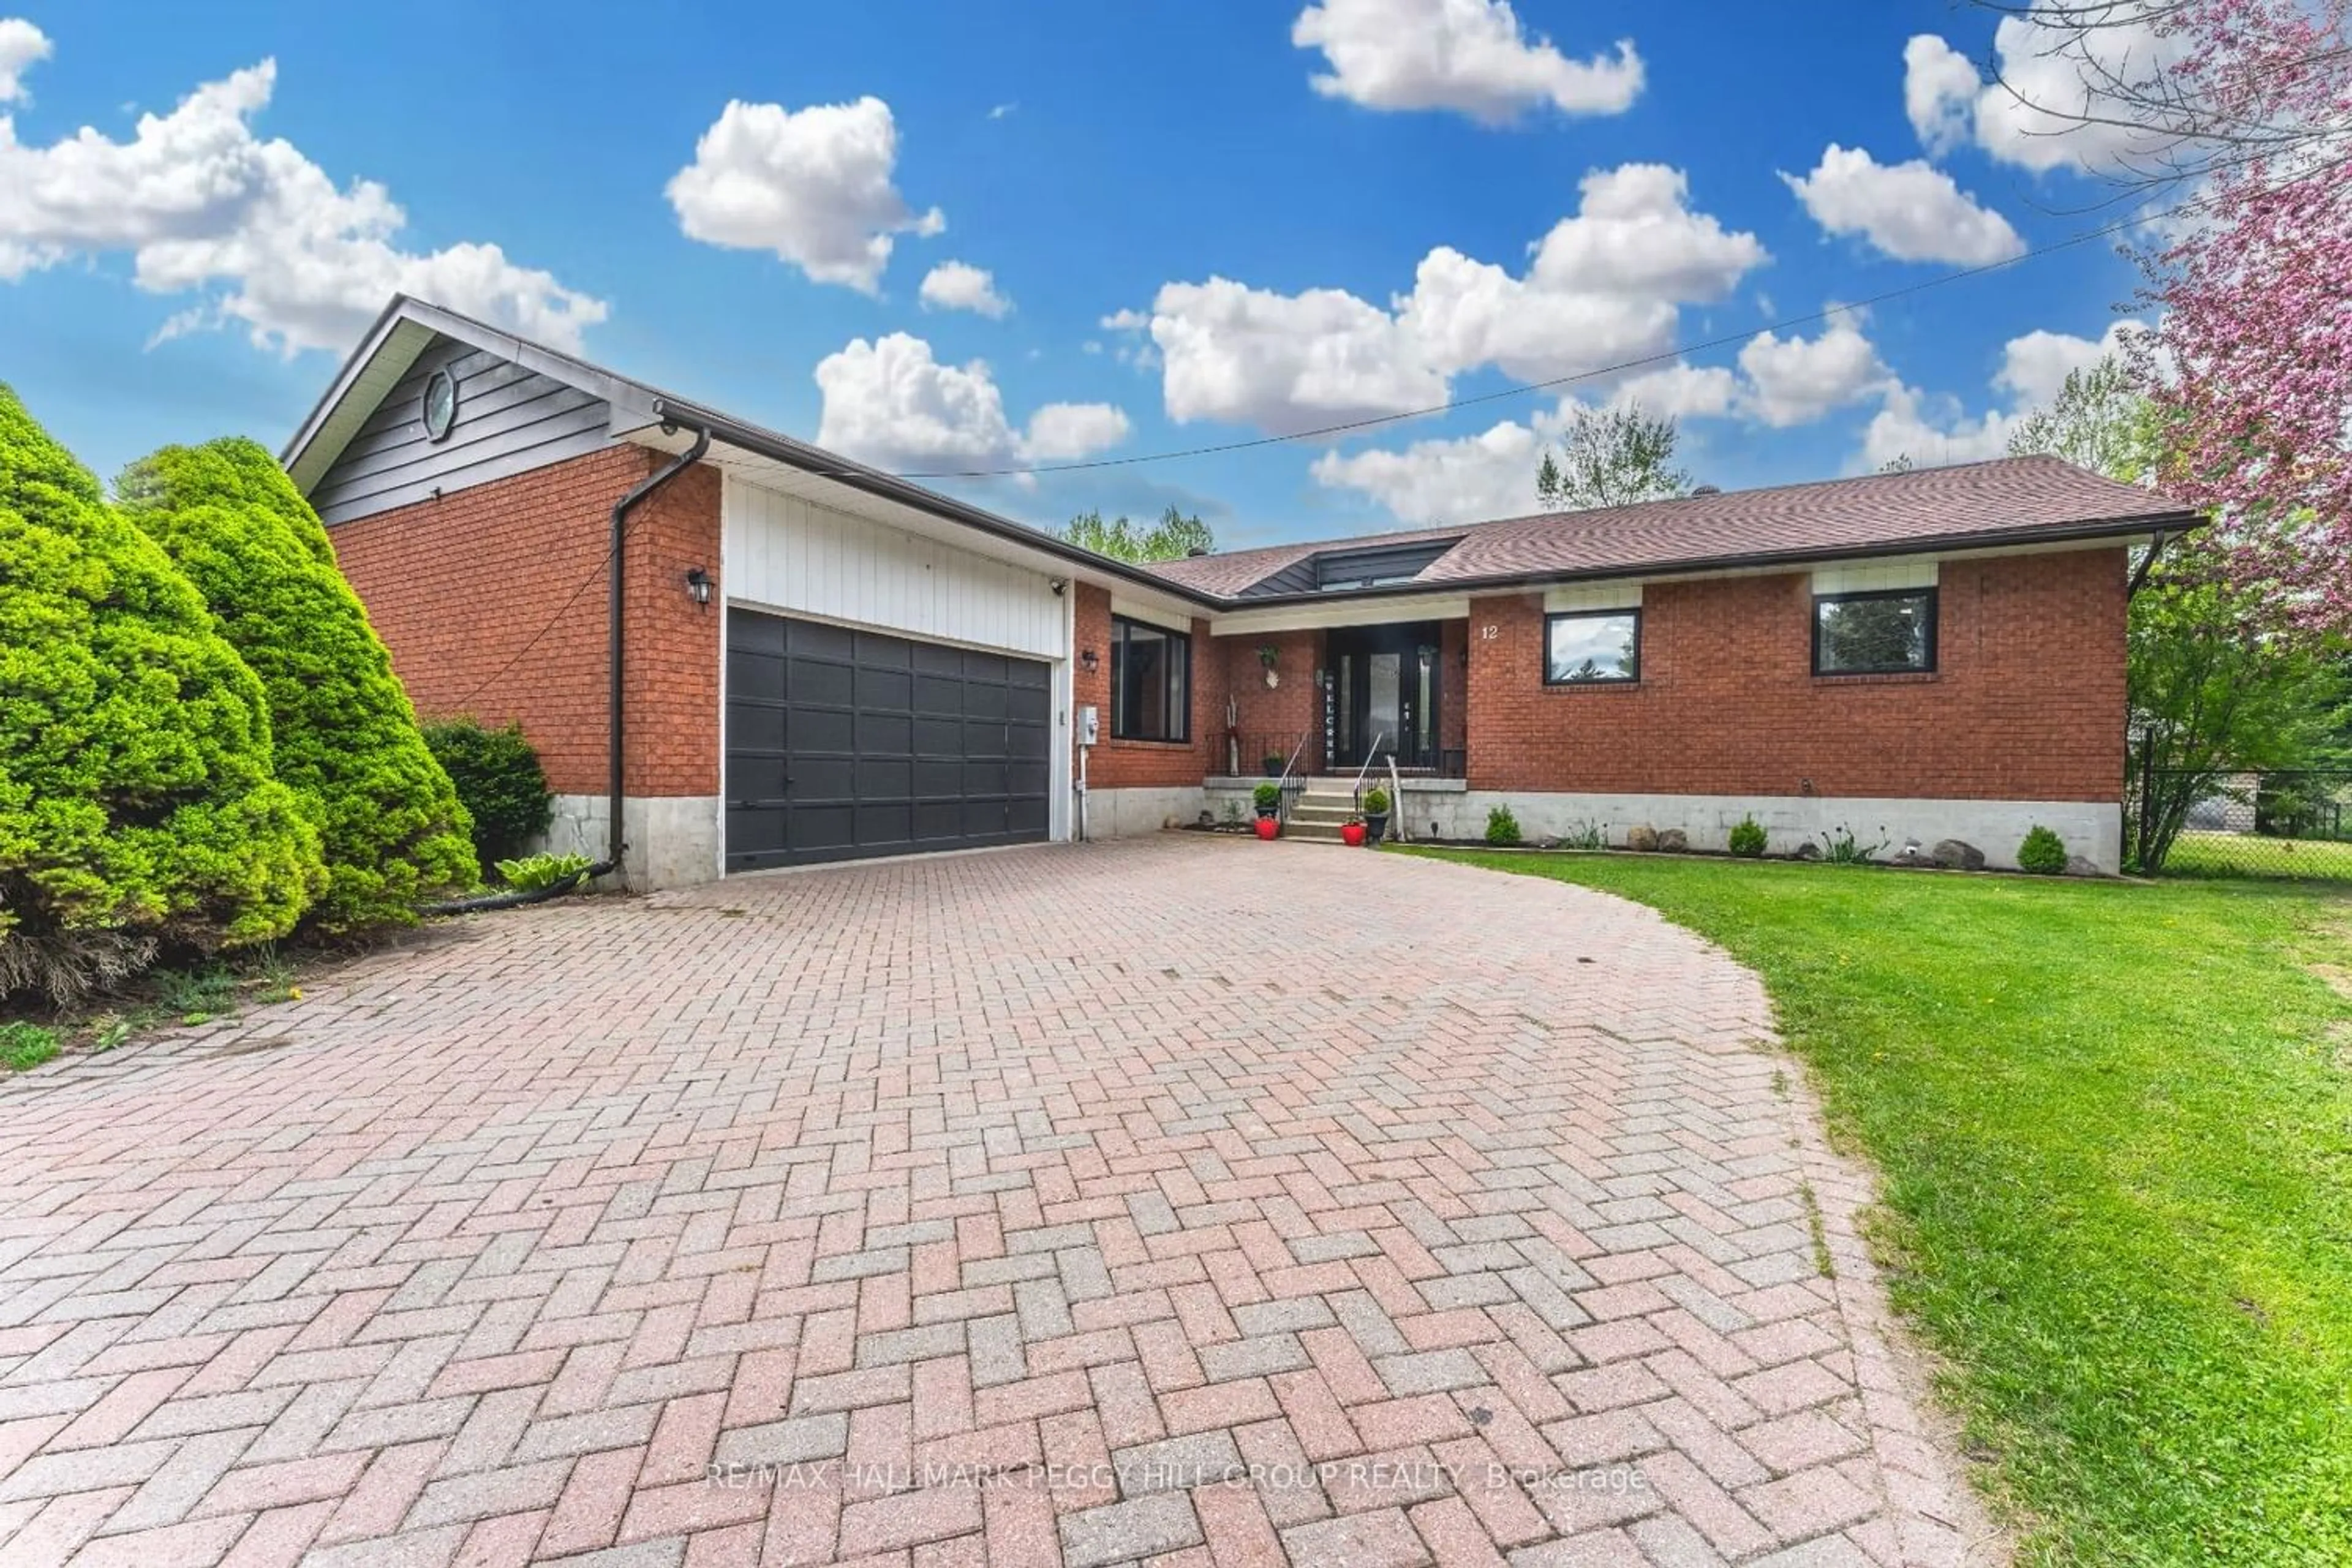 Home with brick exterior material for 12 Marni Lane, Springwater Ontario L0L 2K0